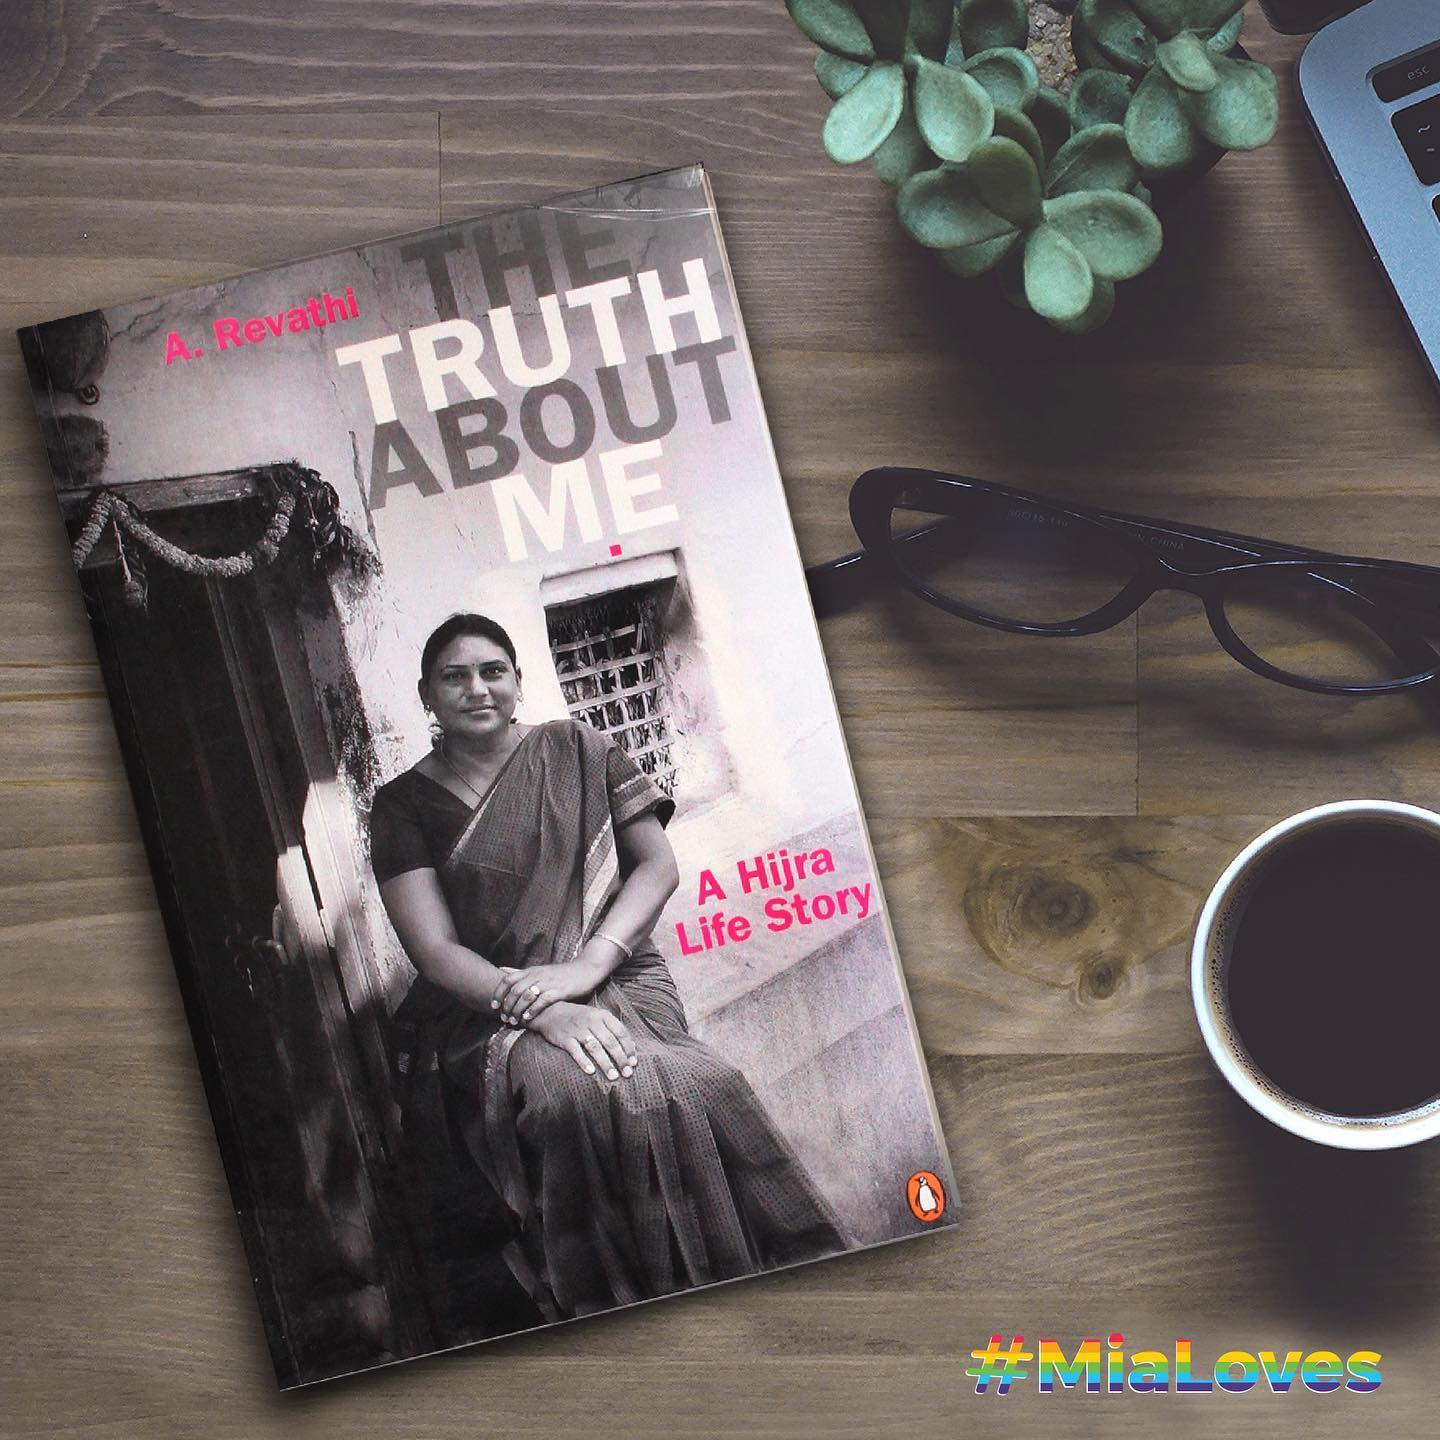 A. Revathi’s Work And The Inclusion Of Non-Normative Literature￼